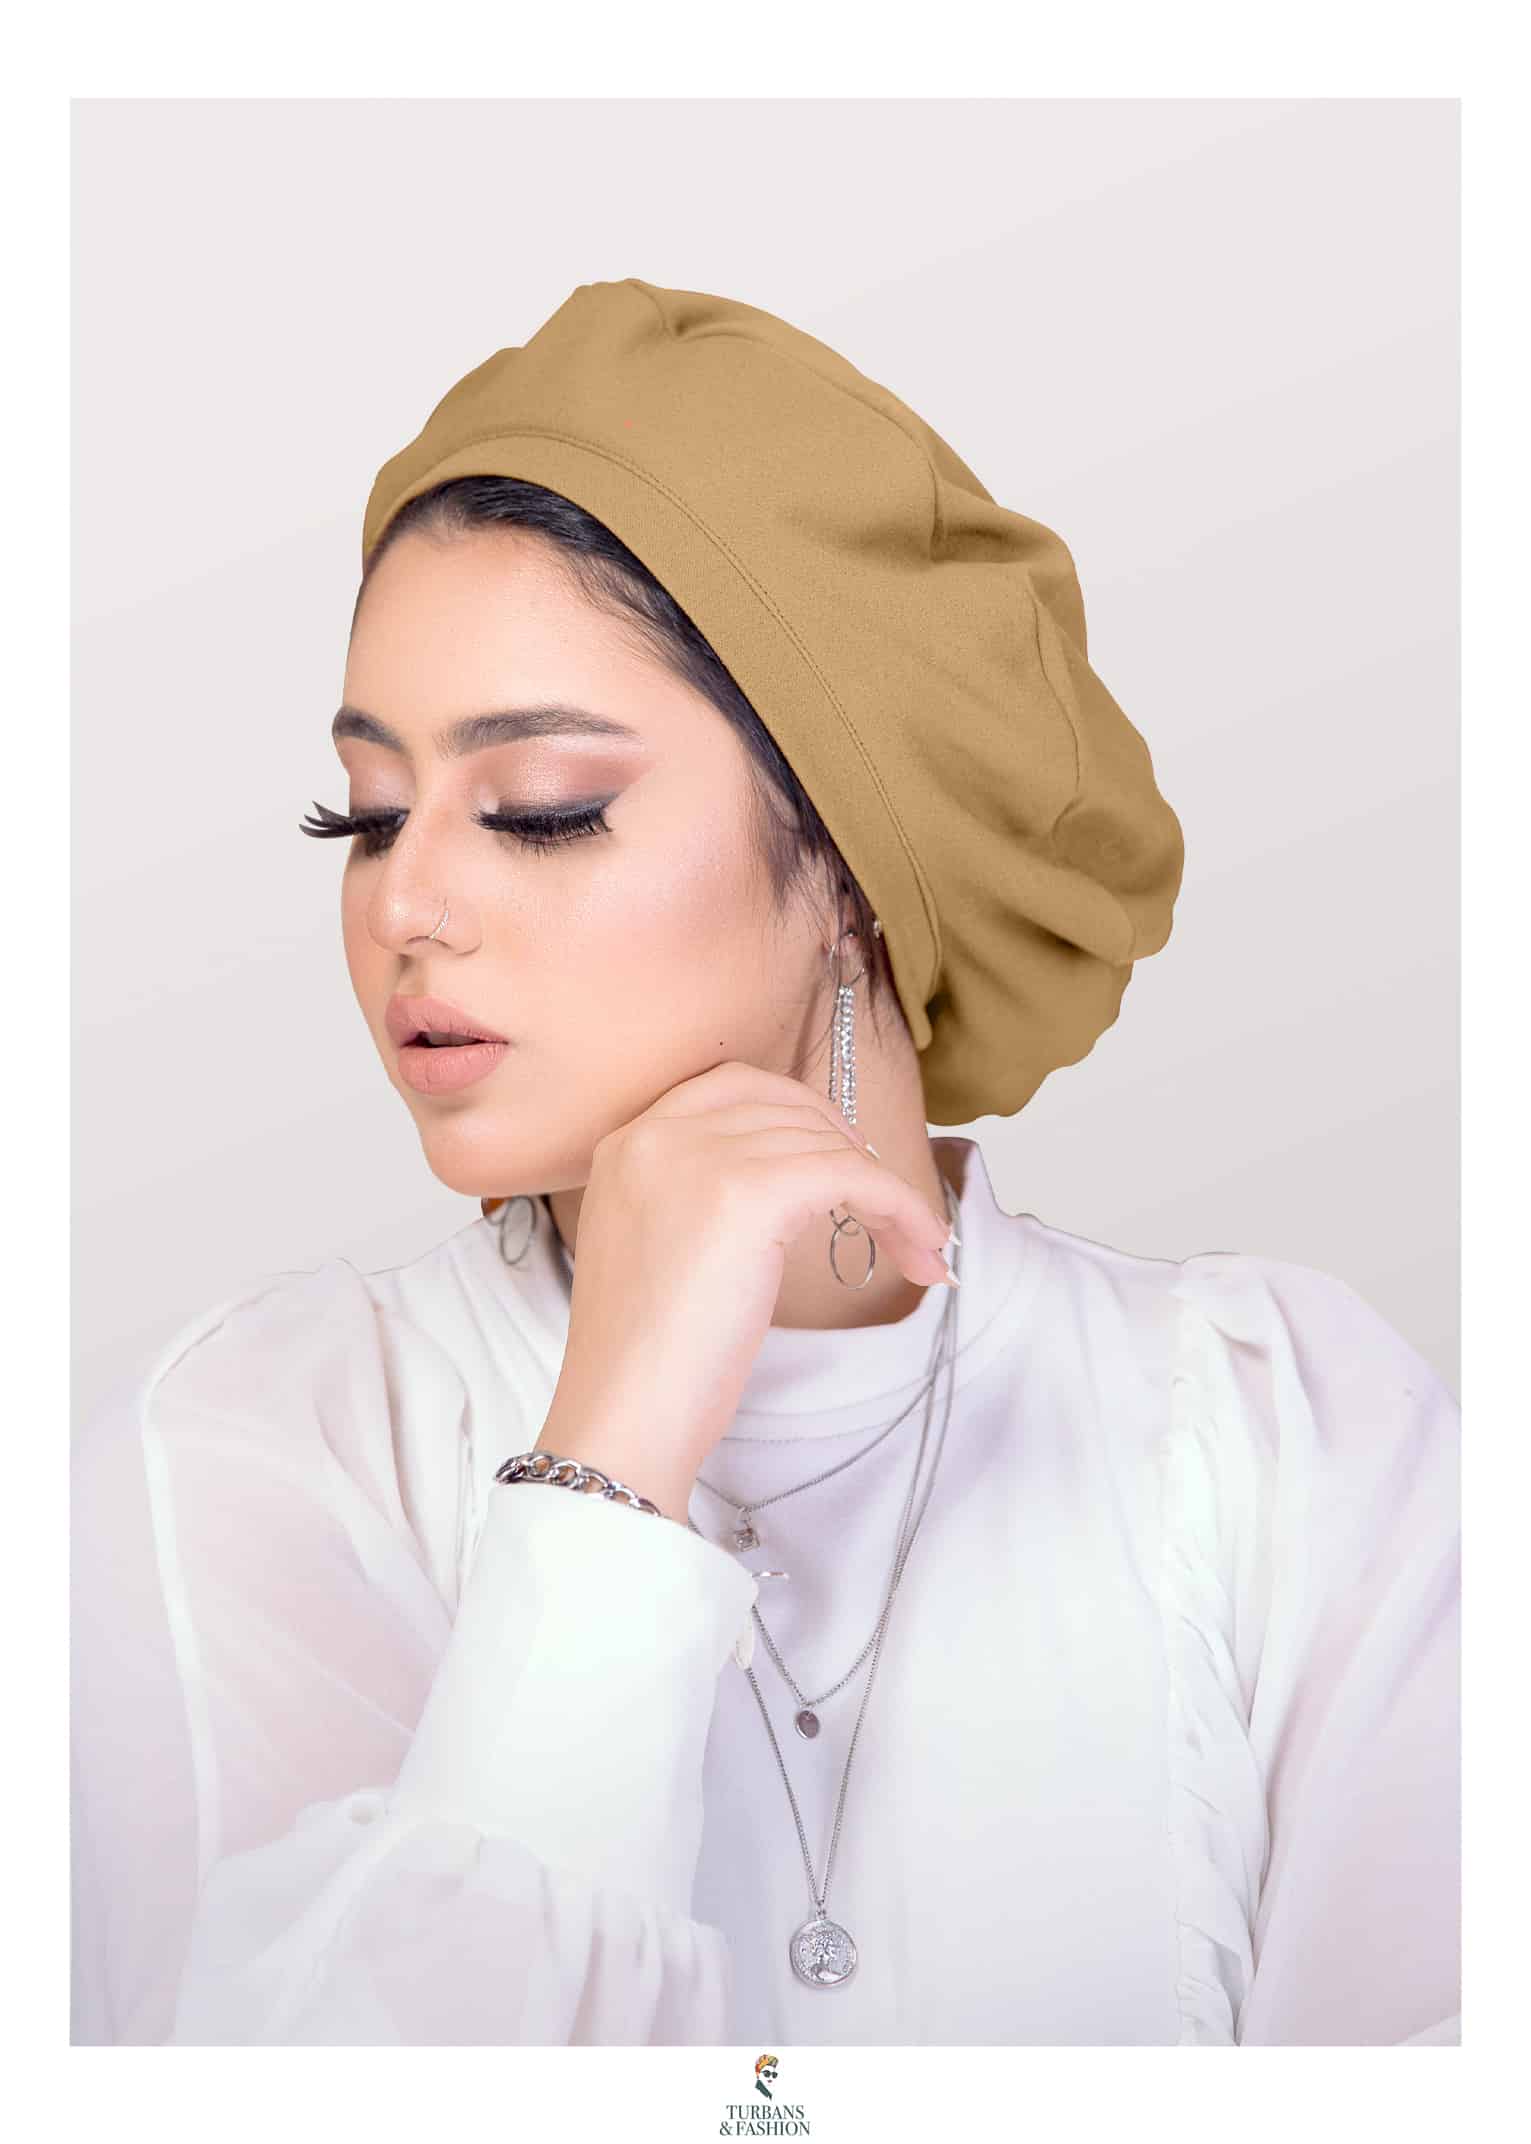 Women’s Casual Light Weight Beret in Soft Crepe Fabric  Effortless Turban and Head Gear